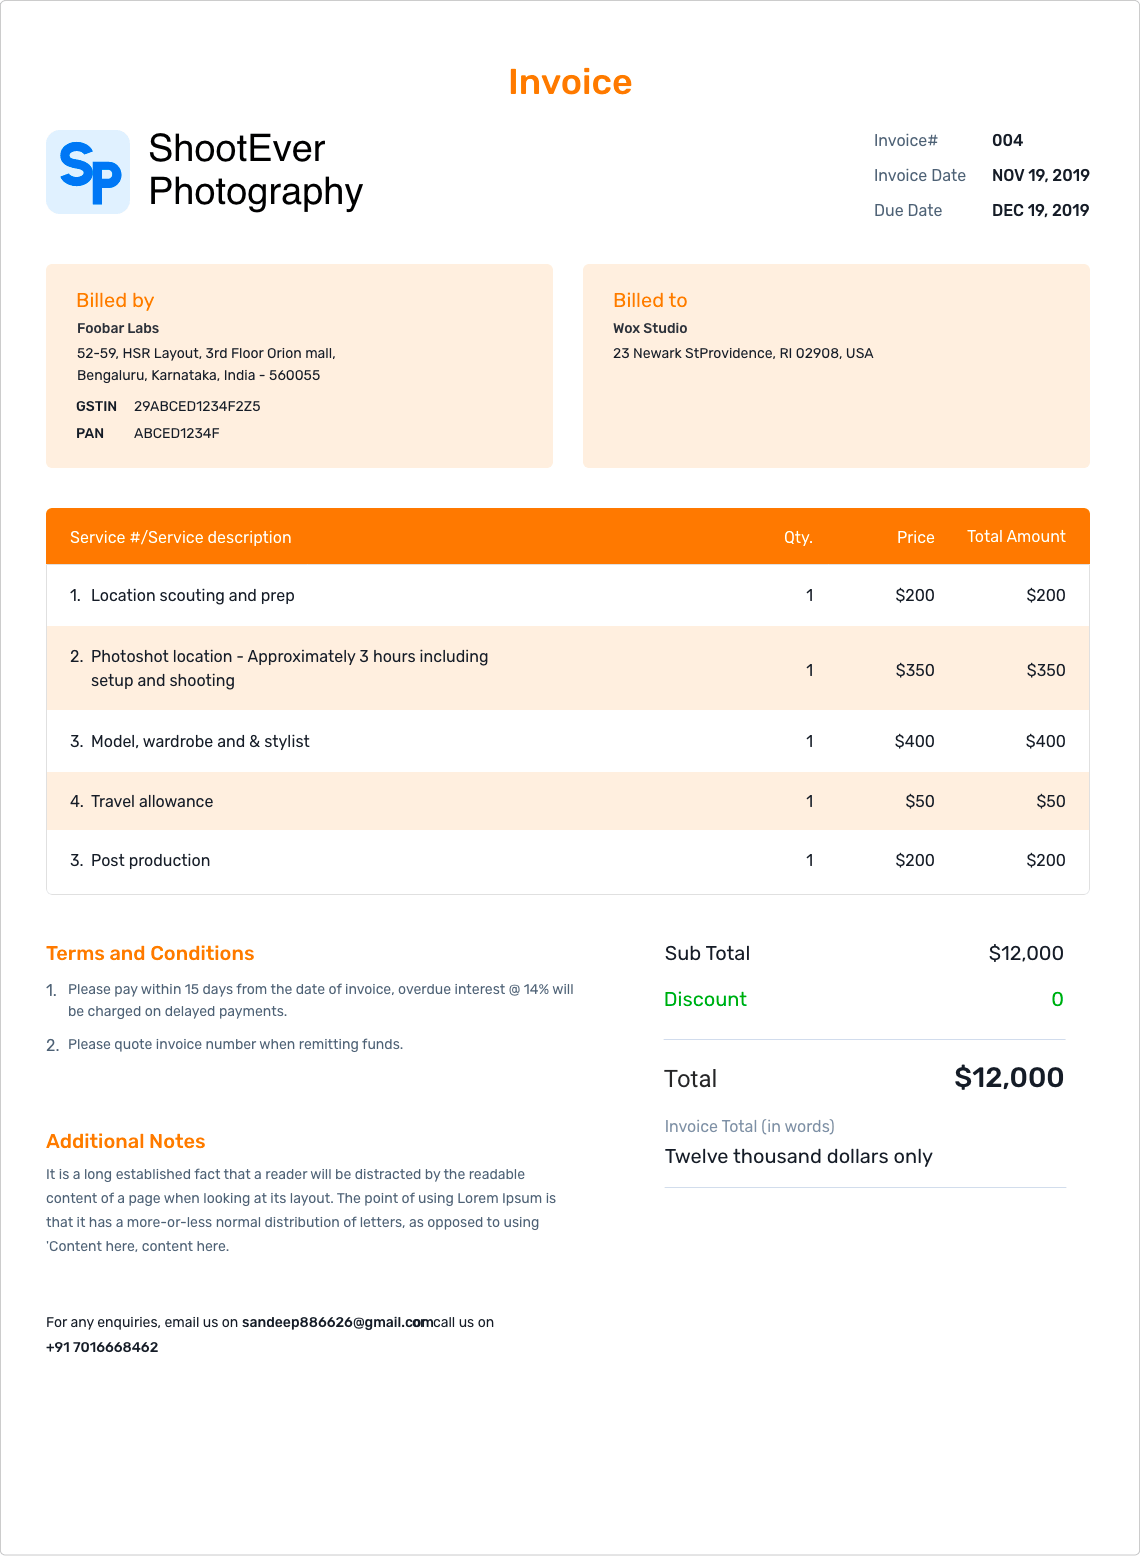 Invoice Template for Photography business